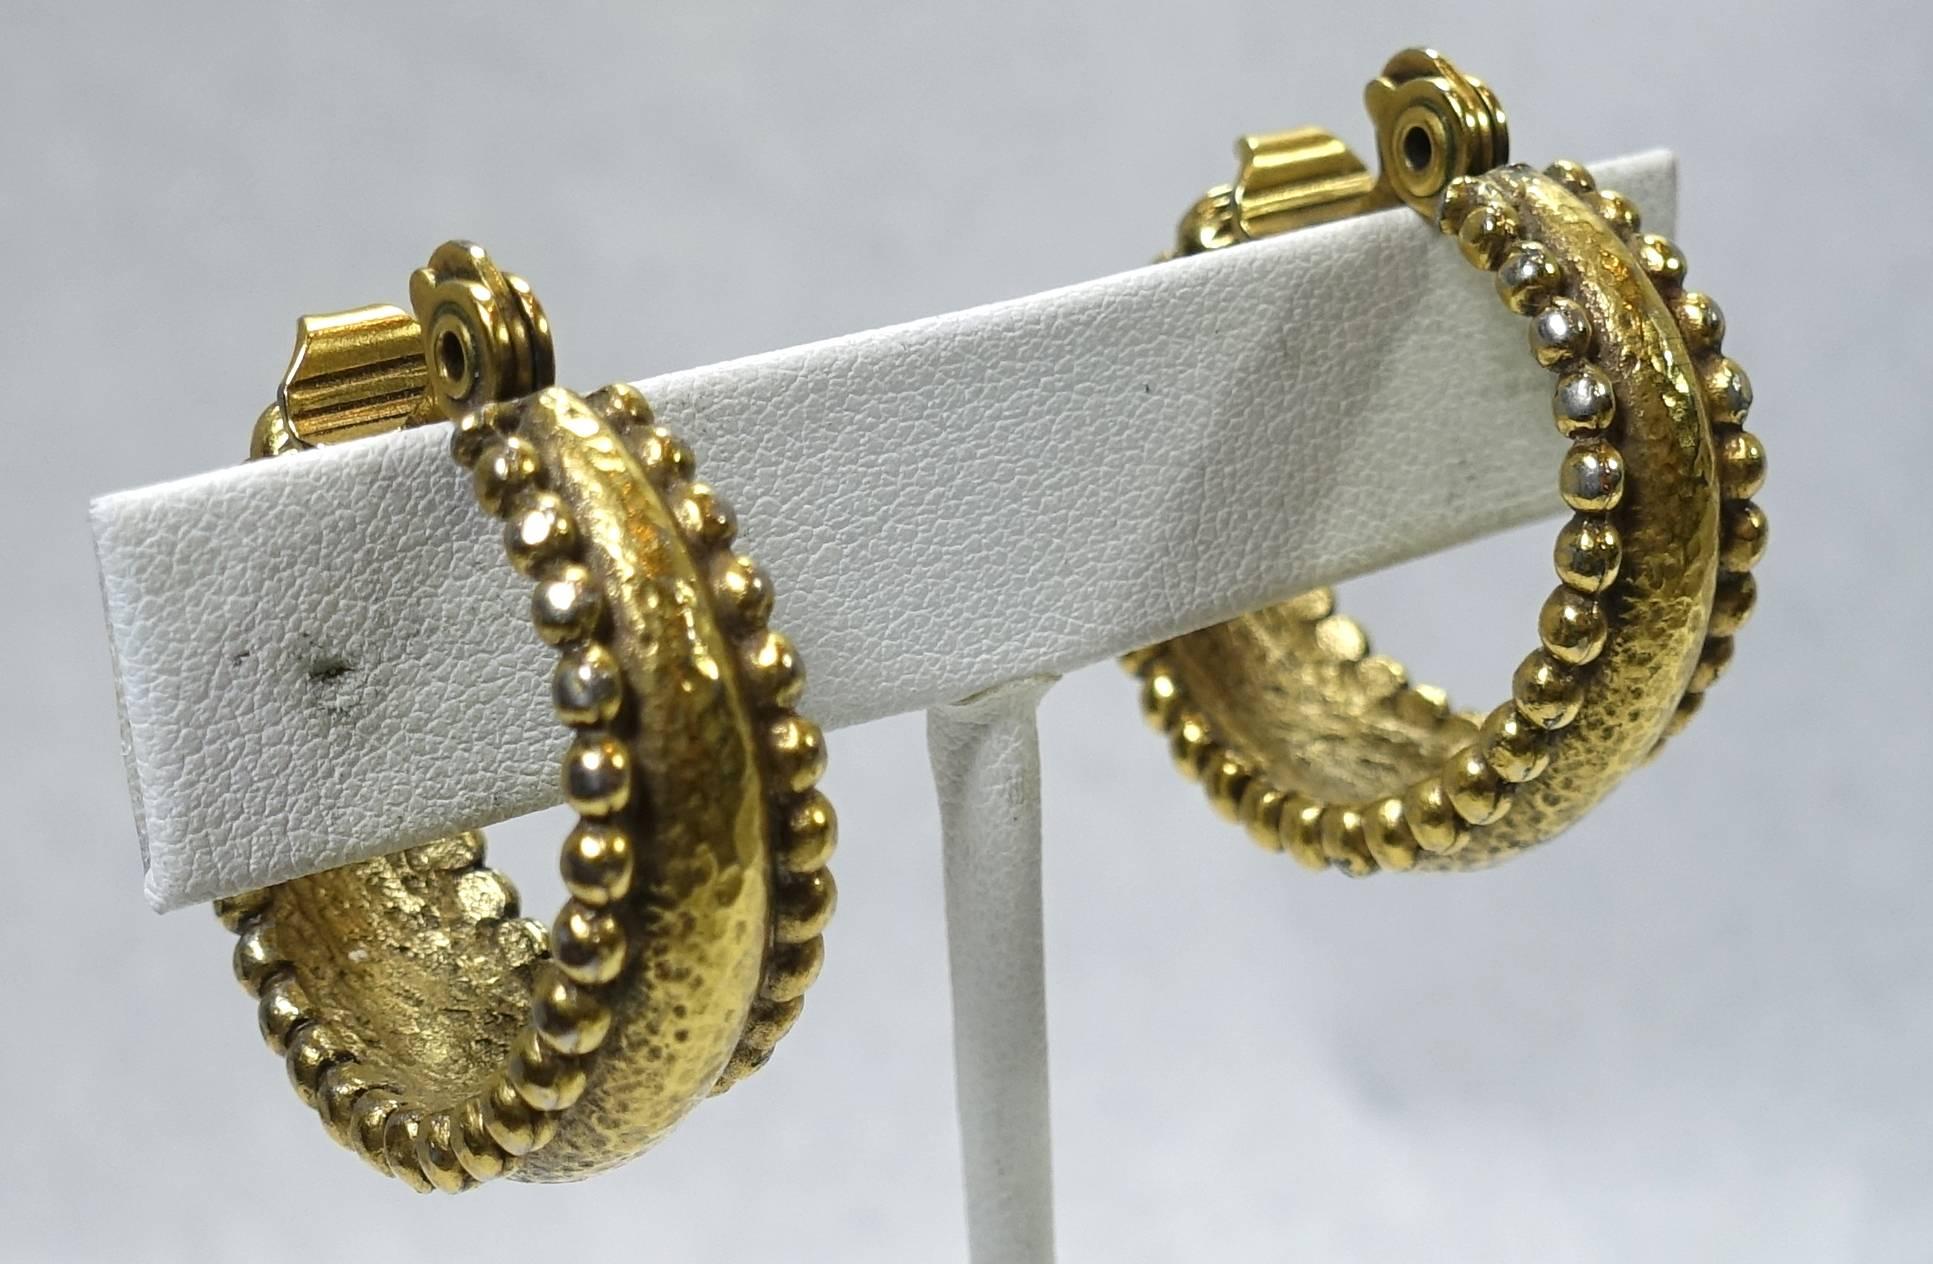 These vintage Yves St. Laurent earrings have a hoop design with gold beaded rims in a gold tone setting.  These clip earrings measure 1-1/8” x 3/8” and signed “YSL”. They are in excellent condition.